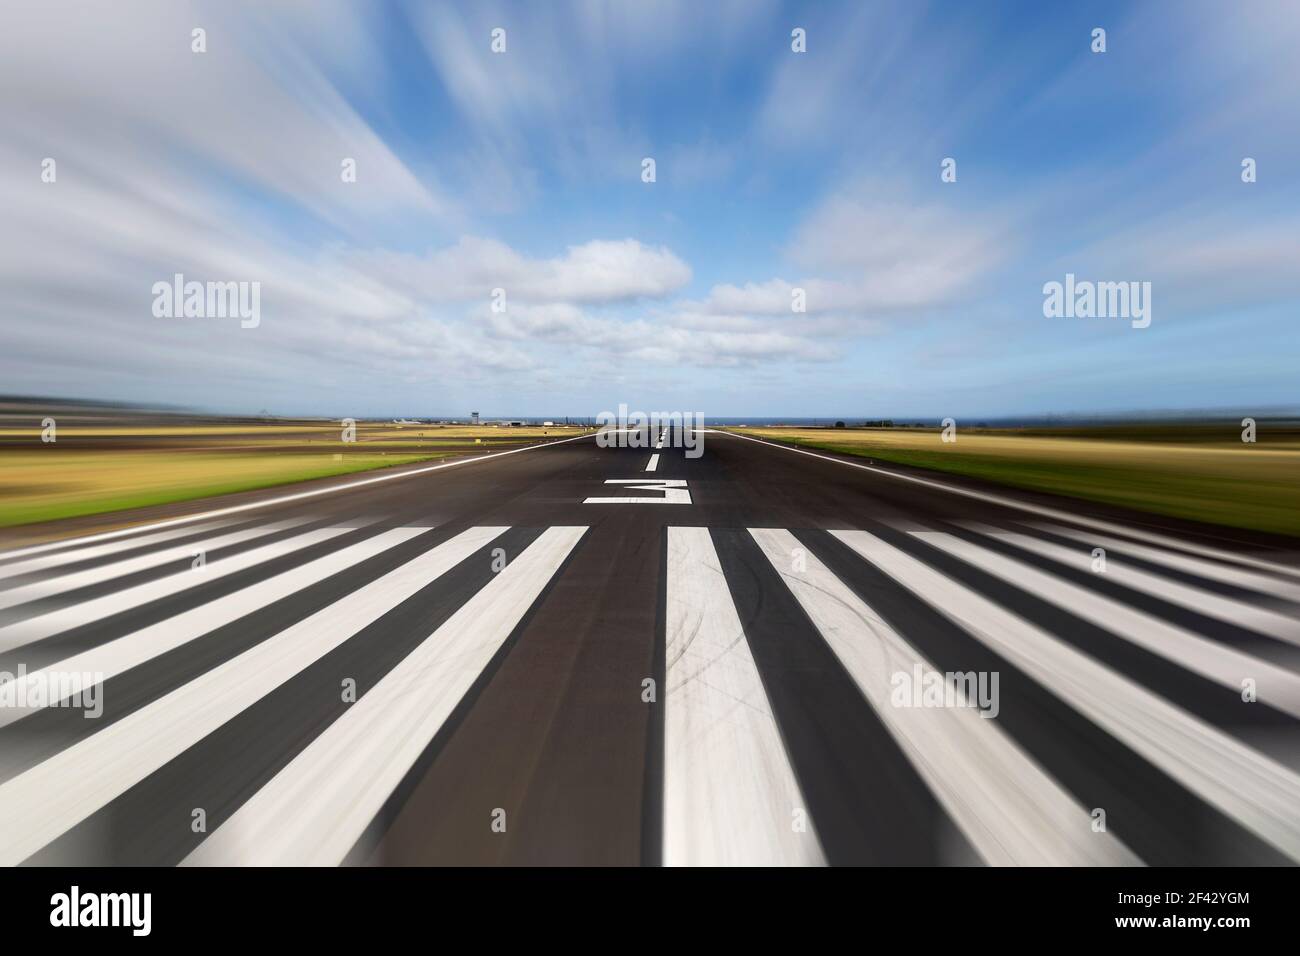 View of Hawaiian island tropical airport runway with motion blur. Stock Photo